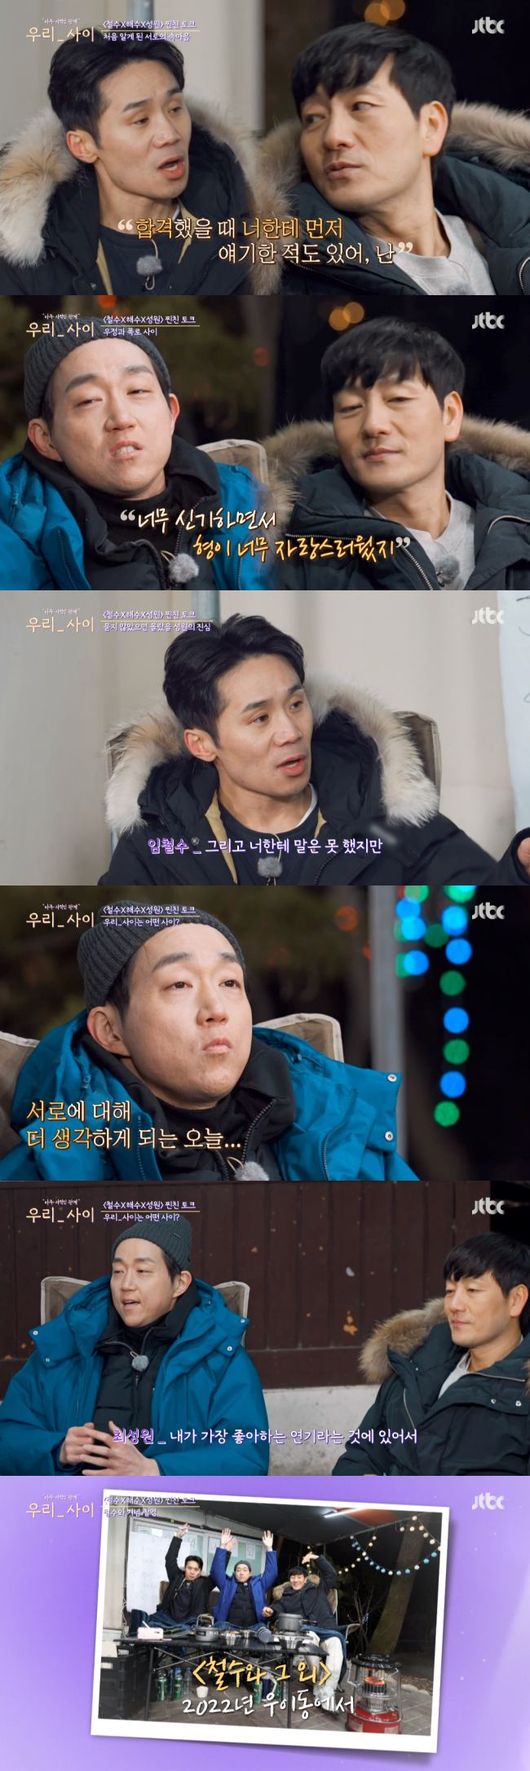 Choi Seong-won, between us, said he had written a suicide note due to a recurrence of leukemia.The JTBC new entertainment program Between us, which was broadcast on the afternoon of the 28th, featured actor im cheol-su, his close friends Park Hae-soo and Choi Seong-won.Ten years of friends shared the stickiness of each other between the three family members.im cheol-su laughed at Park Hae-soo, saying, I am a friend who has been living with me for more than 10 years and has spoken three to four times a day.He also introduced Choi Seong-won as I am a 10-year best friend, Kim Gura of Daehangno.They formed an actor group I want to do and studied acting together and had a long dream like a friend.im cheol-su invited the two to the camping grounds they often went to.First he arrived and wrote 42 questions he asked Park Hae-su and Choi Seong-won, and was greeted by Friends as he set and prepared his own seat.Park Hae-soo and Choi Seong-won were awkward in the performance that they did not often see, but they spent a JinSoul time in the lead of im cheol-su.The three men who had cooked meat and had dinner had a JinSoul talk time, talking to each other with questions that im cheol-su had prepared in advance.As well as the first impression of each other, I also cheered with a talk about worrying about Choi Seong-won, who was sick.Park said to Choi Seong-won, Did we see it at the awards ceremony? Fly Me to Polaris had an entertainment program at that time.Fly Me to Polaris seemed so smart, and im cheol-su said, I hate being late, but when I come an hour ago, Fly Me to Polaris comes an hour and 10 minutes ago.I cleaned it together and talked while drinking coffee on the roof. im cheol-su and Park Hae-su were together for 10 years.The best thing was cost reduction, Park said of his cohabitation with im cheol-su, and I never really hated it.I want to pick up whats in my room, but Im picking up everything on my computer. Choi Seong-won added, Its a safety hypersensitivity.Their meeting has been suspended for a while since Choi Seong-won was sick.im cheol-su said, Fly Me to Polaris has not been able to get together since 2016 but I tried to resume the meeting.We talked tentatively about the fact that it is meaningless to gather in the absence of Fly Me to Polaris, and so there are some things that we can not gather. Choi Seong-won said, I am in good condition and bad condition, and I have been transplanted for fundamental treatment, and there are inevitably aftereffects and side effects that follow.The first one is dry, and the nails are split, growing, eyes and mouth dry, and breathing a little bit. Choi Seong-won then said, I still want to be real. Why did it happen to me?I am grateful to go with you, but I do not like it. im cheol-su said, We seem to have just continued to laugh.I did not tell you, but we broke up and we did not talk for a while. As long as they had been together in the same dream for a long time, they were like family members. im cheol-su thanked Park Hae-su, who noticed that he was not feeling well.It was a sticky friendship that I told im cheol-su before my family when I passed the audition.Park Hae-soo said, Fly Me to Polaris is like a brother like a grateful brother who made me realize a lot.I was told that withdrawal was part of my body, and that it had become, but I wish it would have degenerated and disappeared.Choi Seong-won said, Seasu was a tremendous shock to me in my acting that I really like and excited.I want to get closer than now, and I want to know more.  And because the withdrawal is now a recurrence, I have to transplant it, but I have a lot of good stories and I find a bad story.So I wrote it down, and when I asked who I should ask, I was withdrawn. I thought about it. im cheol-su, Park Hae-su, and Choi Seong-won were more of a family-like relationship than blood with more than a decade of friendship.JTBC broadcast screen capture